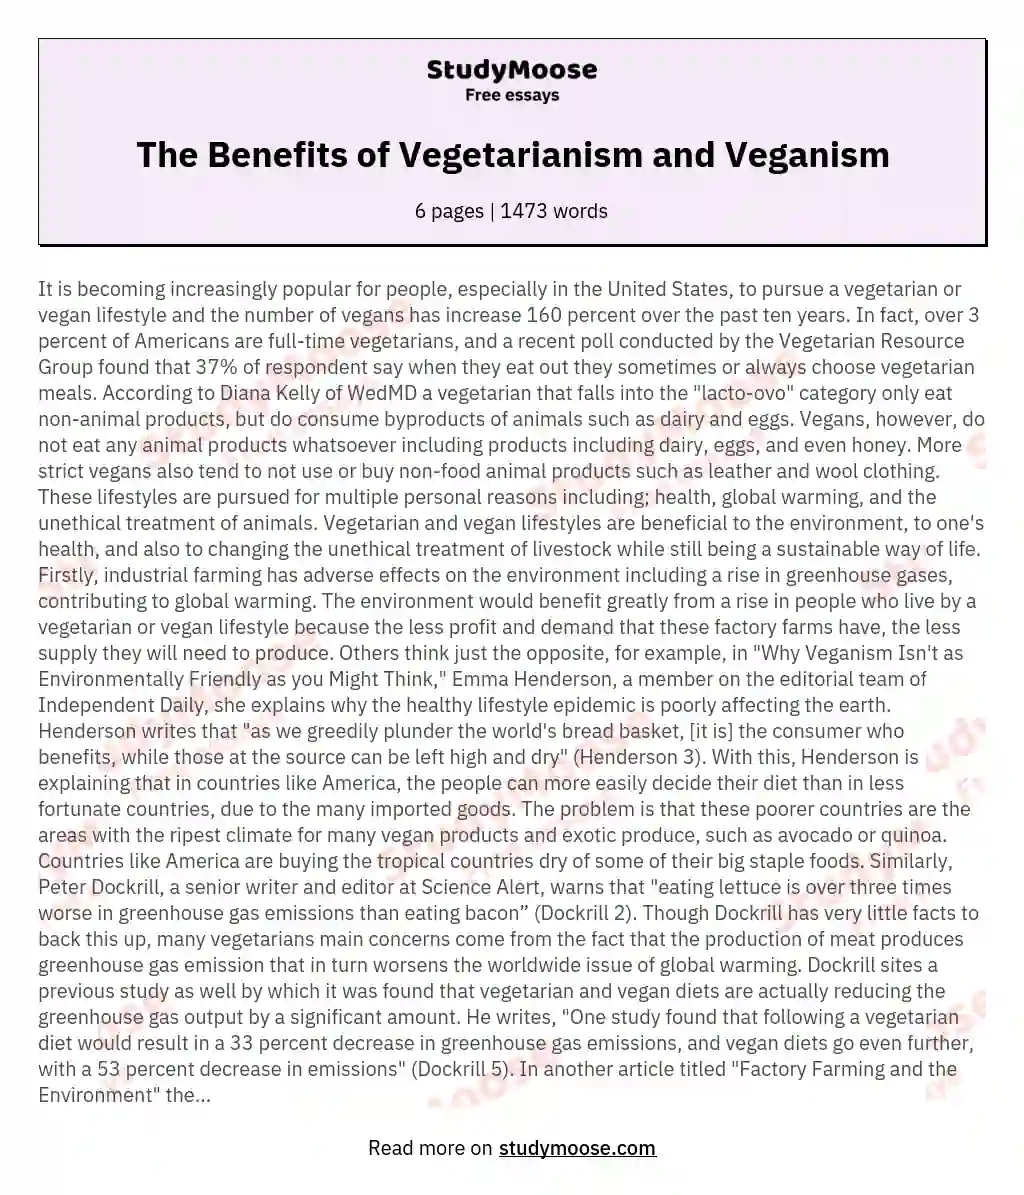 title for essay about vegetarianism